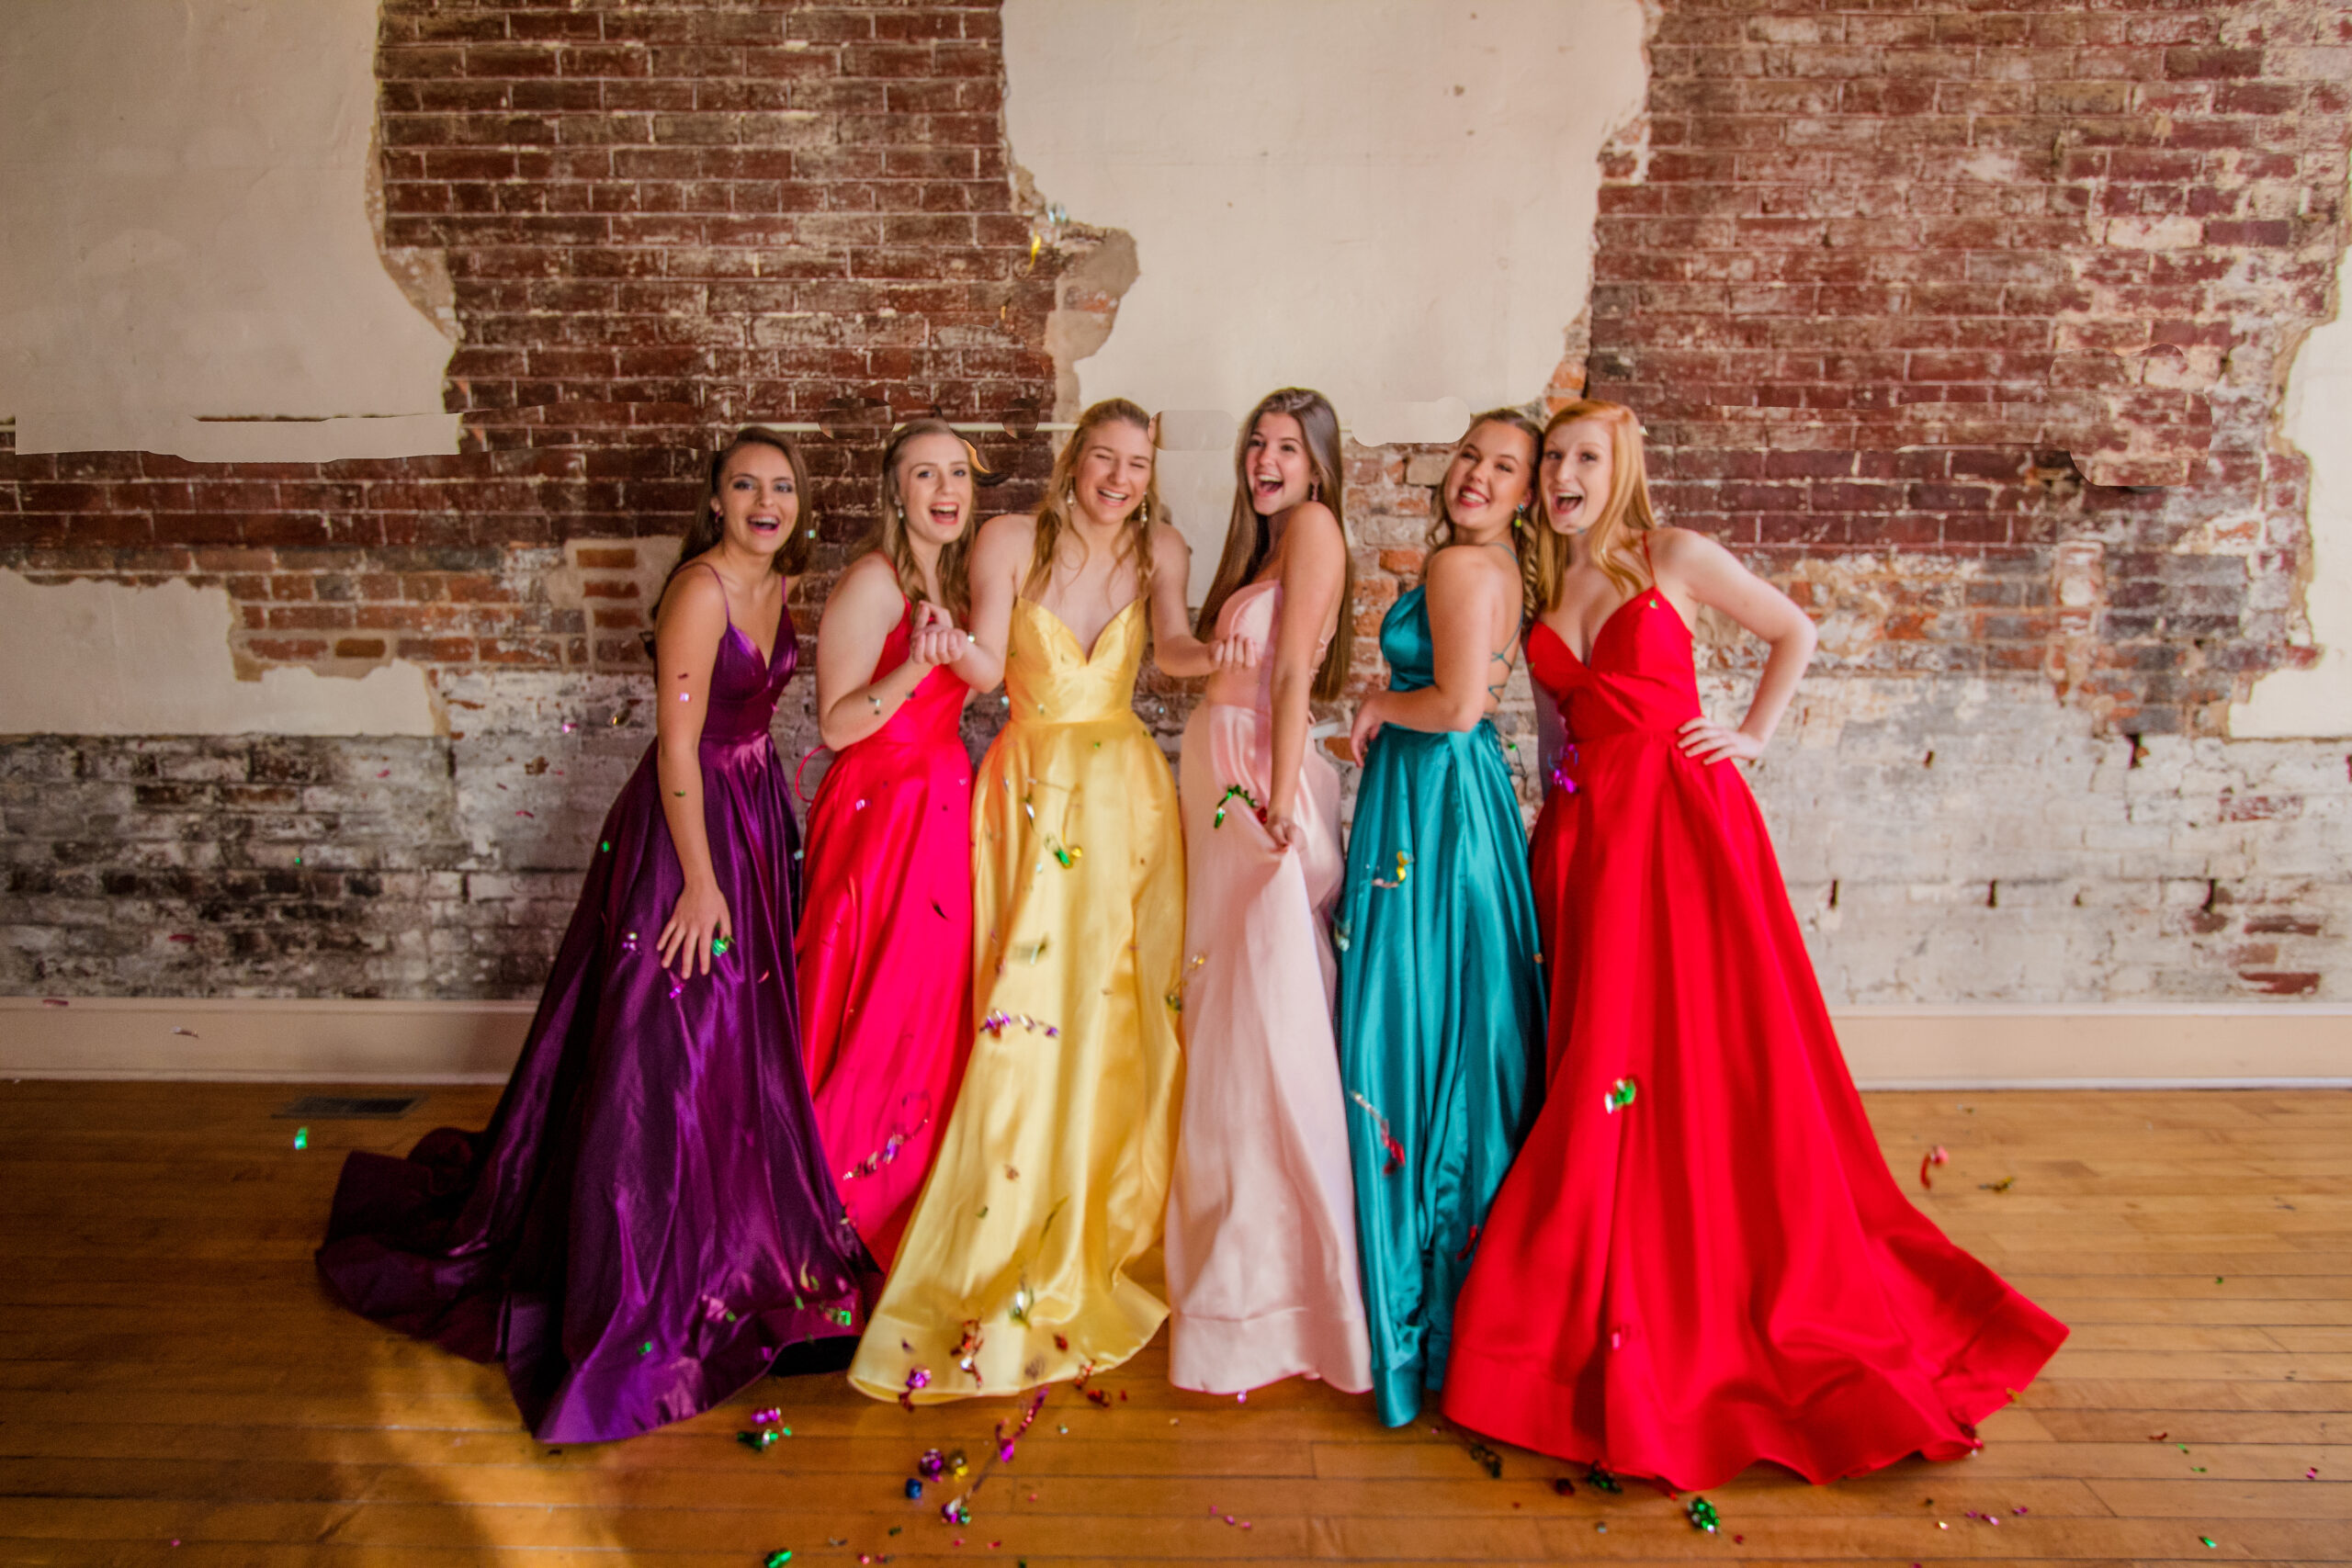 6 girls standing in multicolored prom dresses throwing confetti and laughing in a brick building